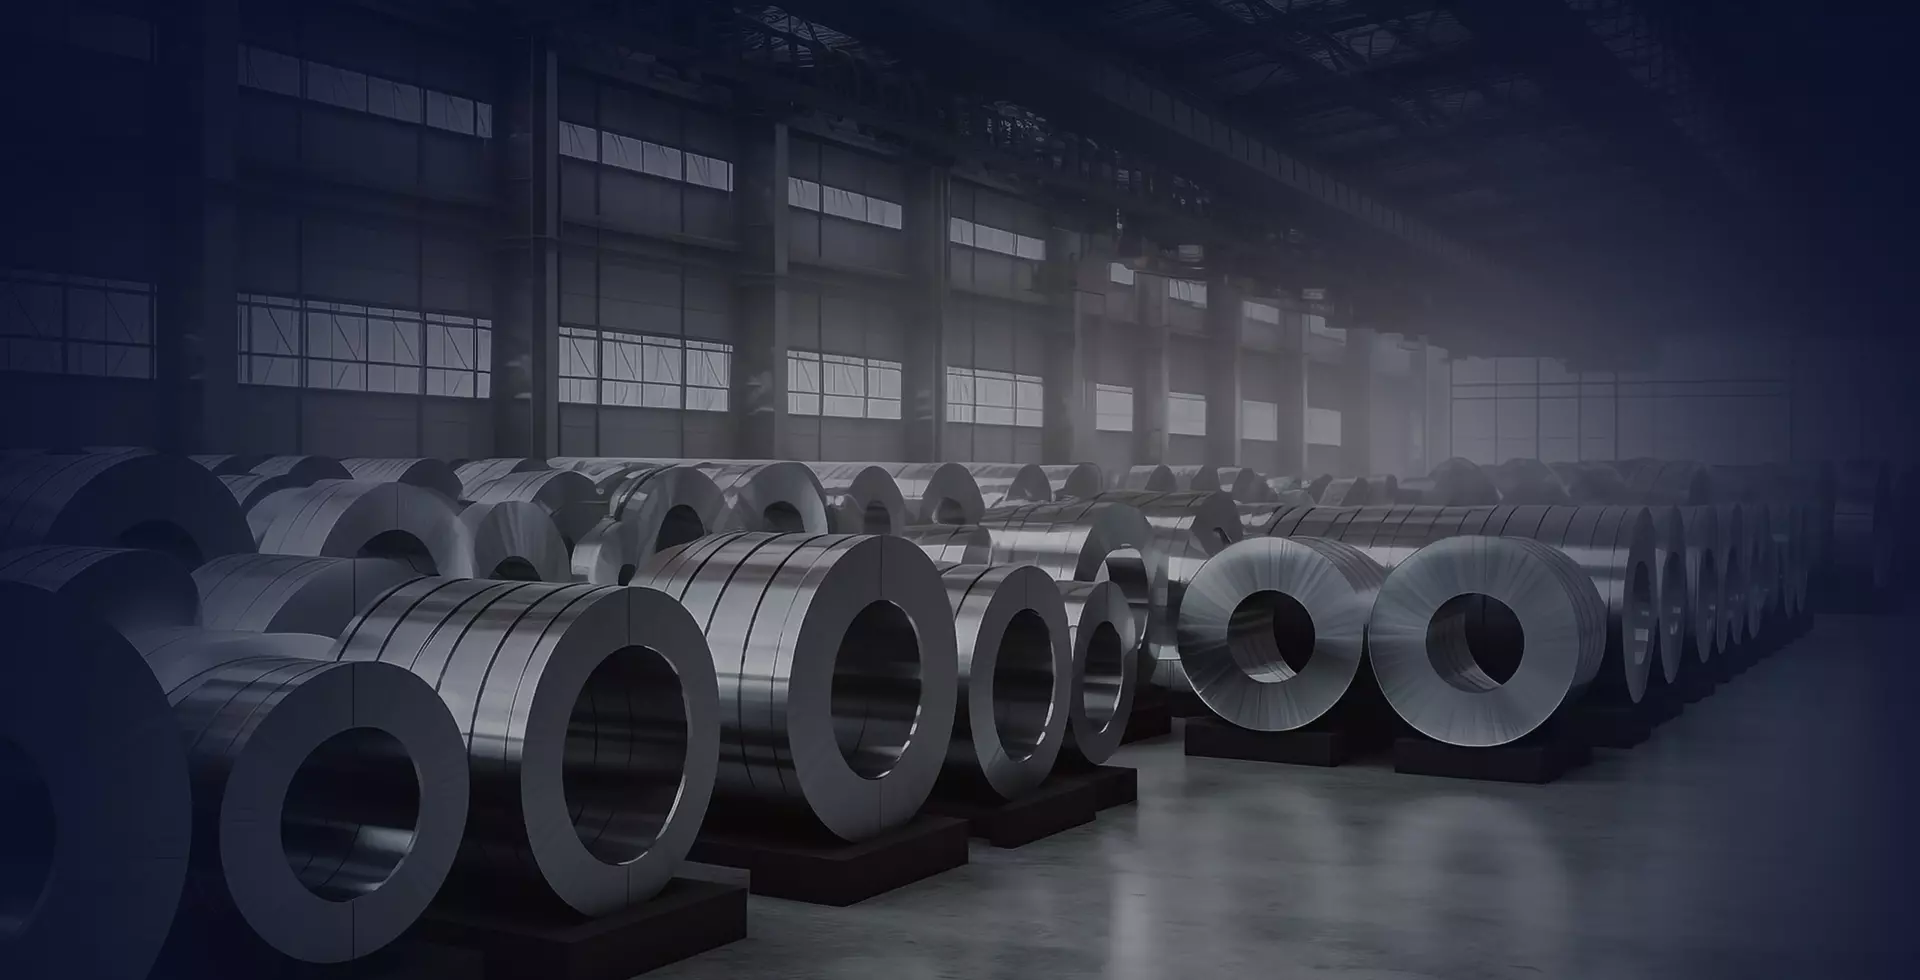 Gnee Steel Co., Ltd. is a leading stainless steel manufacturer in China. We produce stainless steel pipes, stainless steel coils, stainless steel sheets, stainless steel pipe fittings, stainless steel profiles.